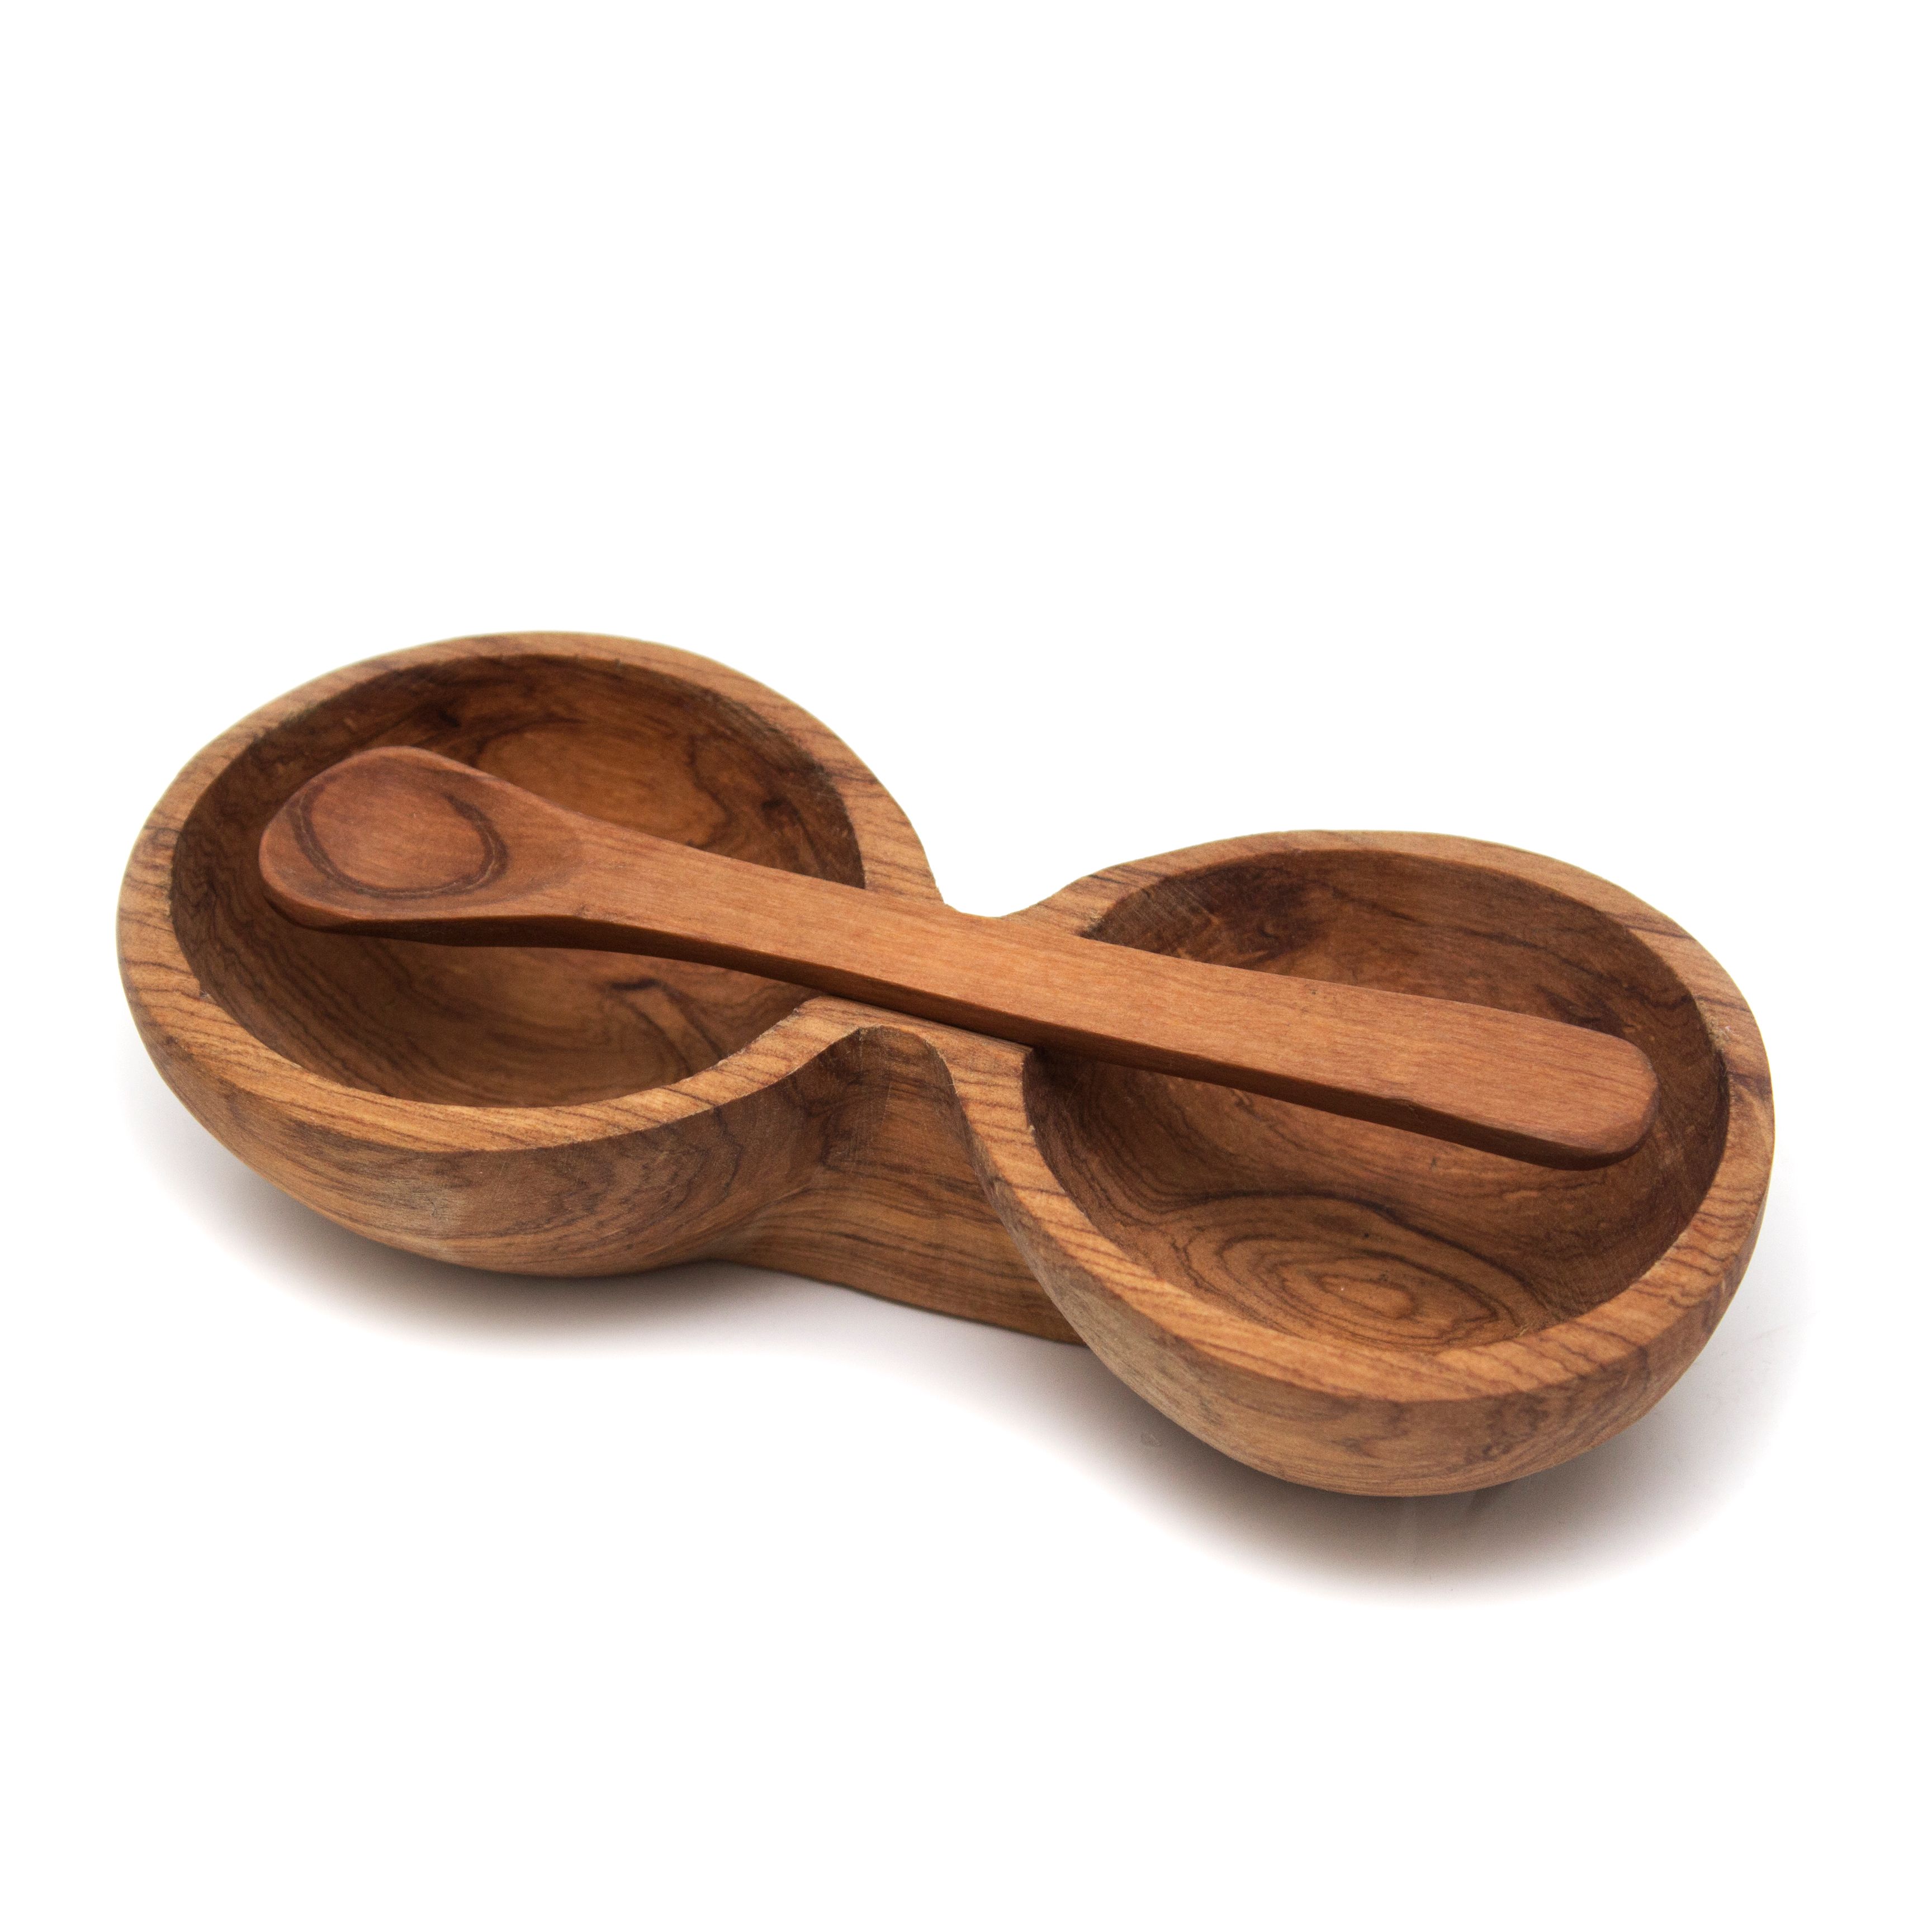 AARVEN Olive Wood Double Bowl and Spoon Set